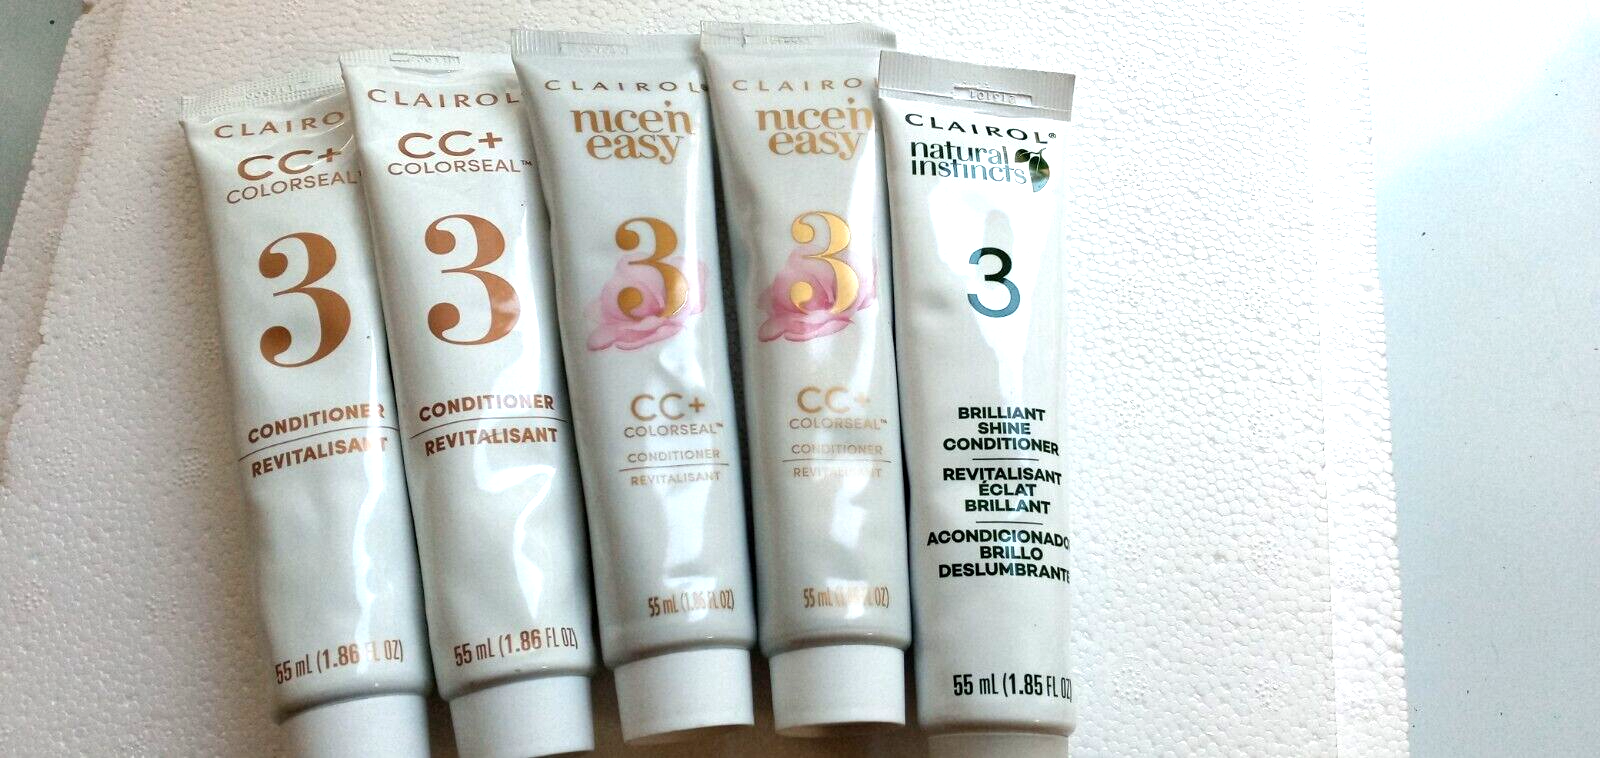 Lot of 5 Clairol  "3" Conditioners - $25.00